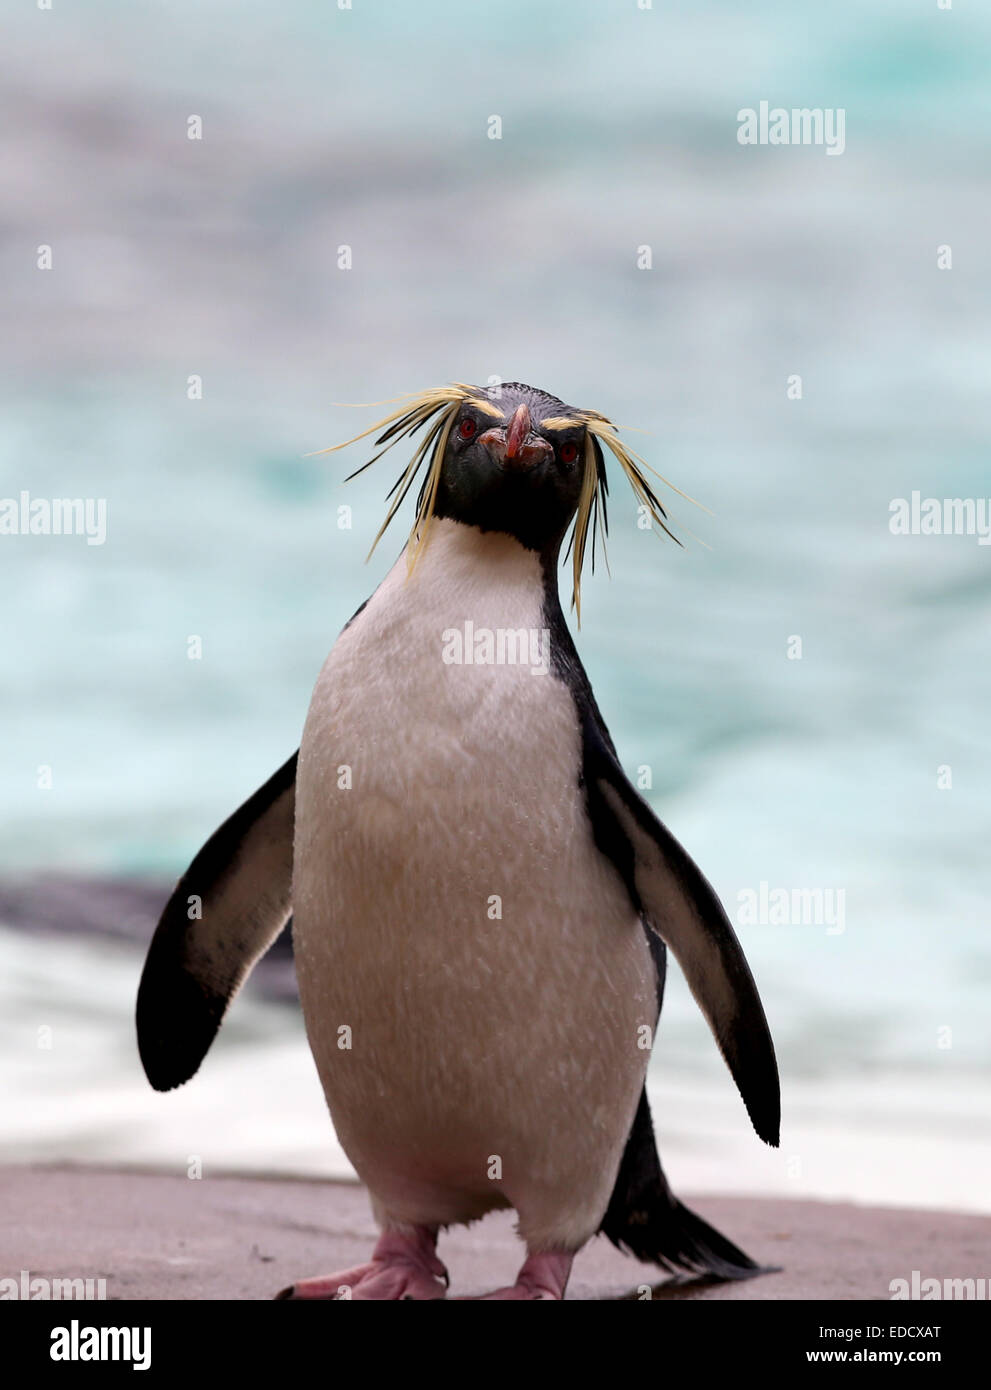 London, UK. 5th Jan, 2015. A Rockhopper Penguin stands by a pond during the ZSL London Zoo's annual stocktake of animals in London, UK, on Jan. 5, 2015. The zoo's annual stocktake requires keepers to check on the numbers of each one of over 750 species of animals living in the zoo. Credit:  Han Yan/Xinhua/Alamy Live News Stock Photo